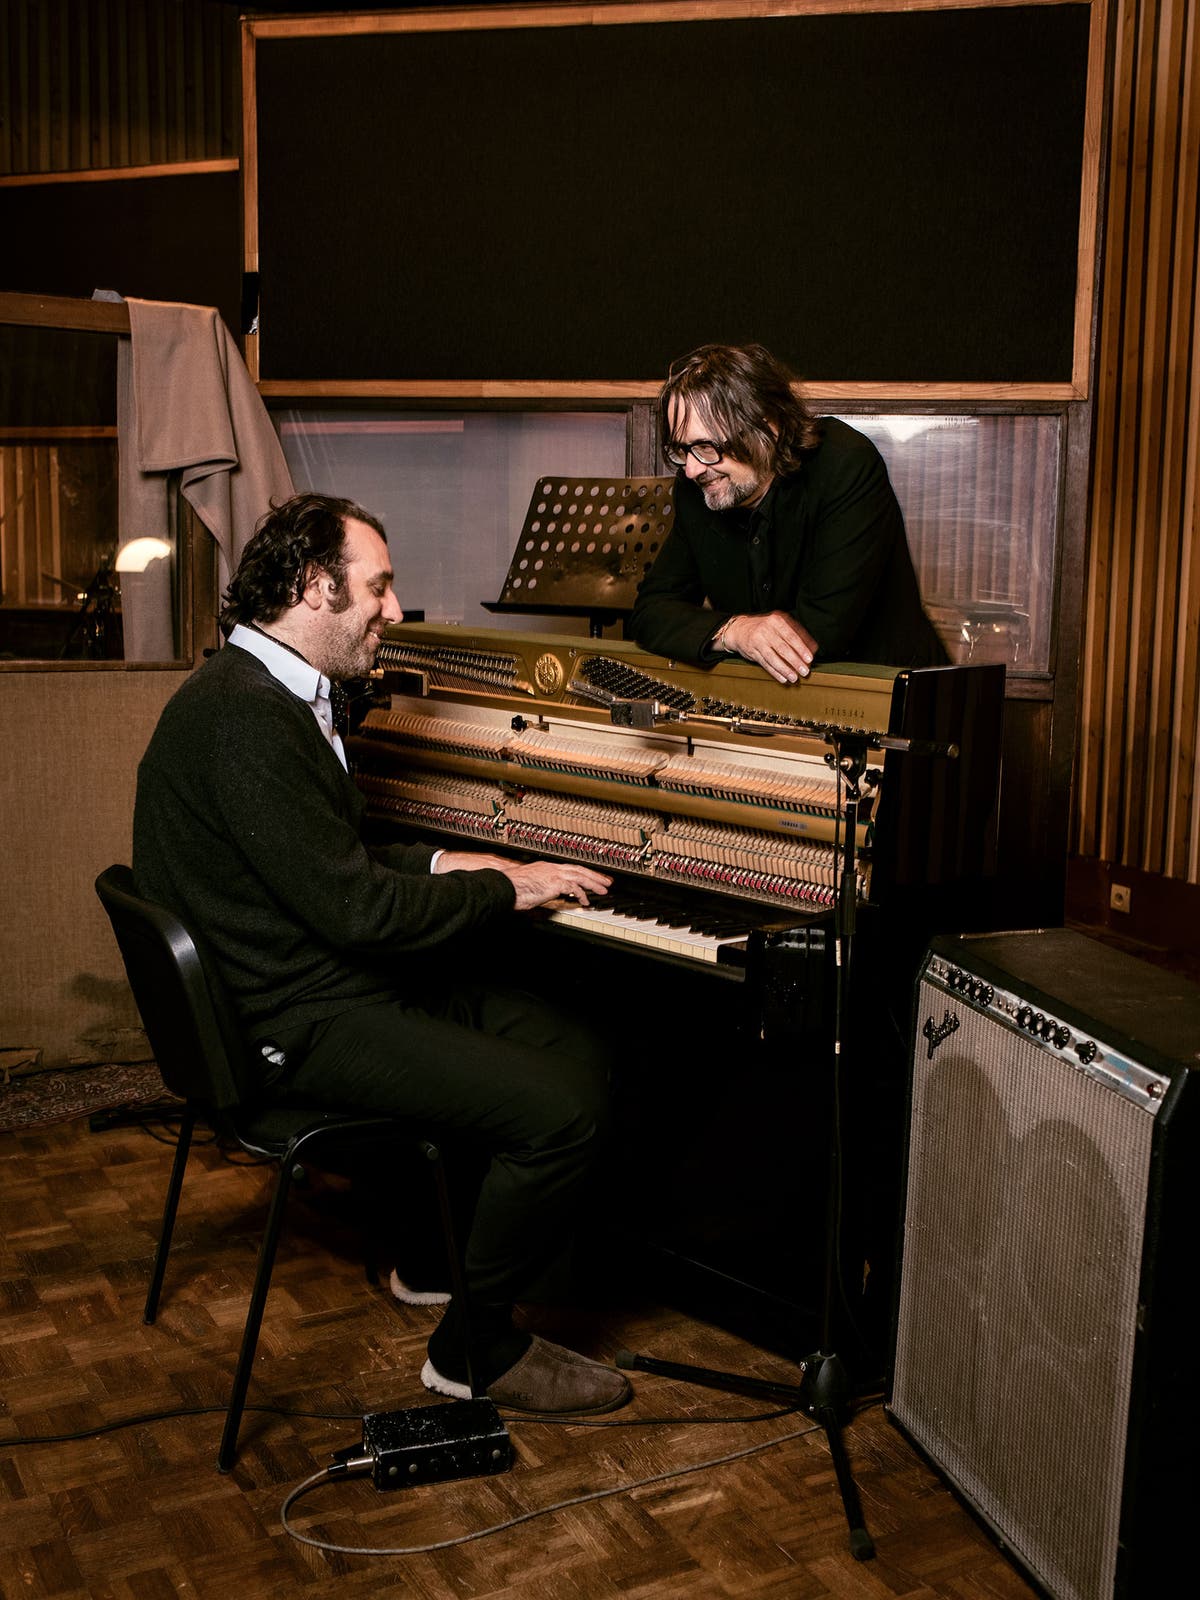 Chilly Gonzales's career clinic, Music